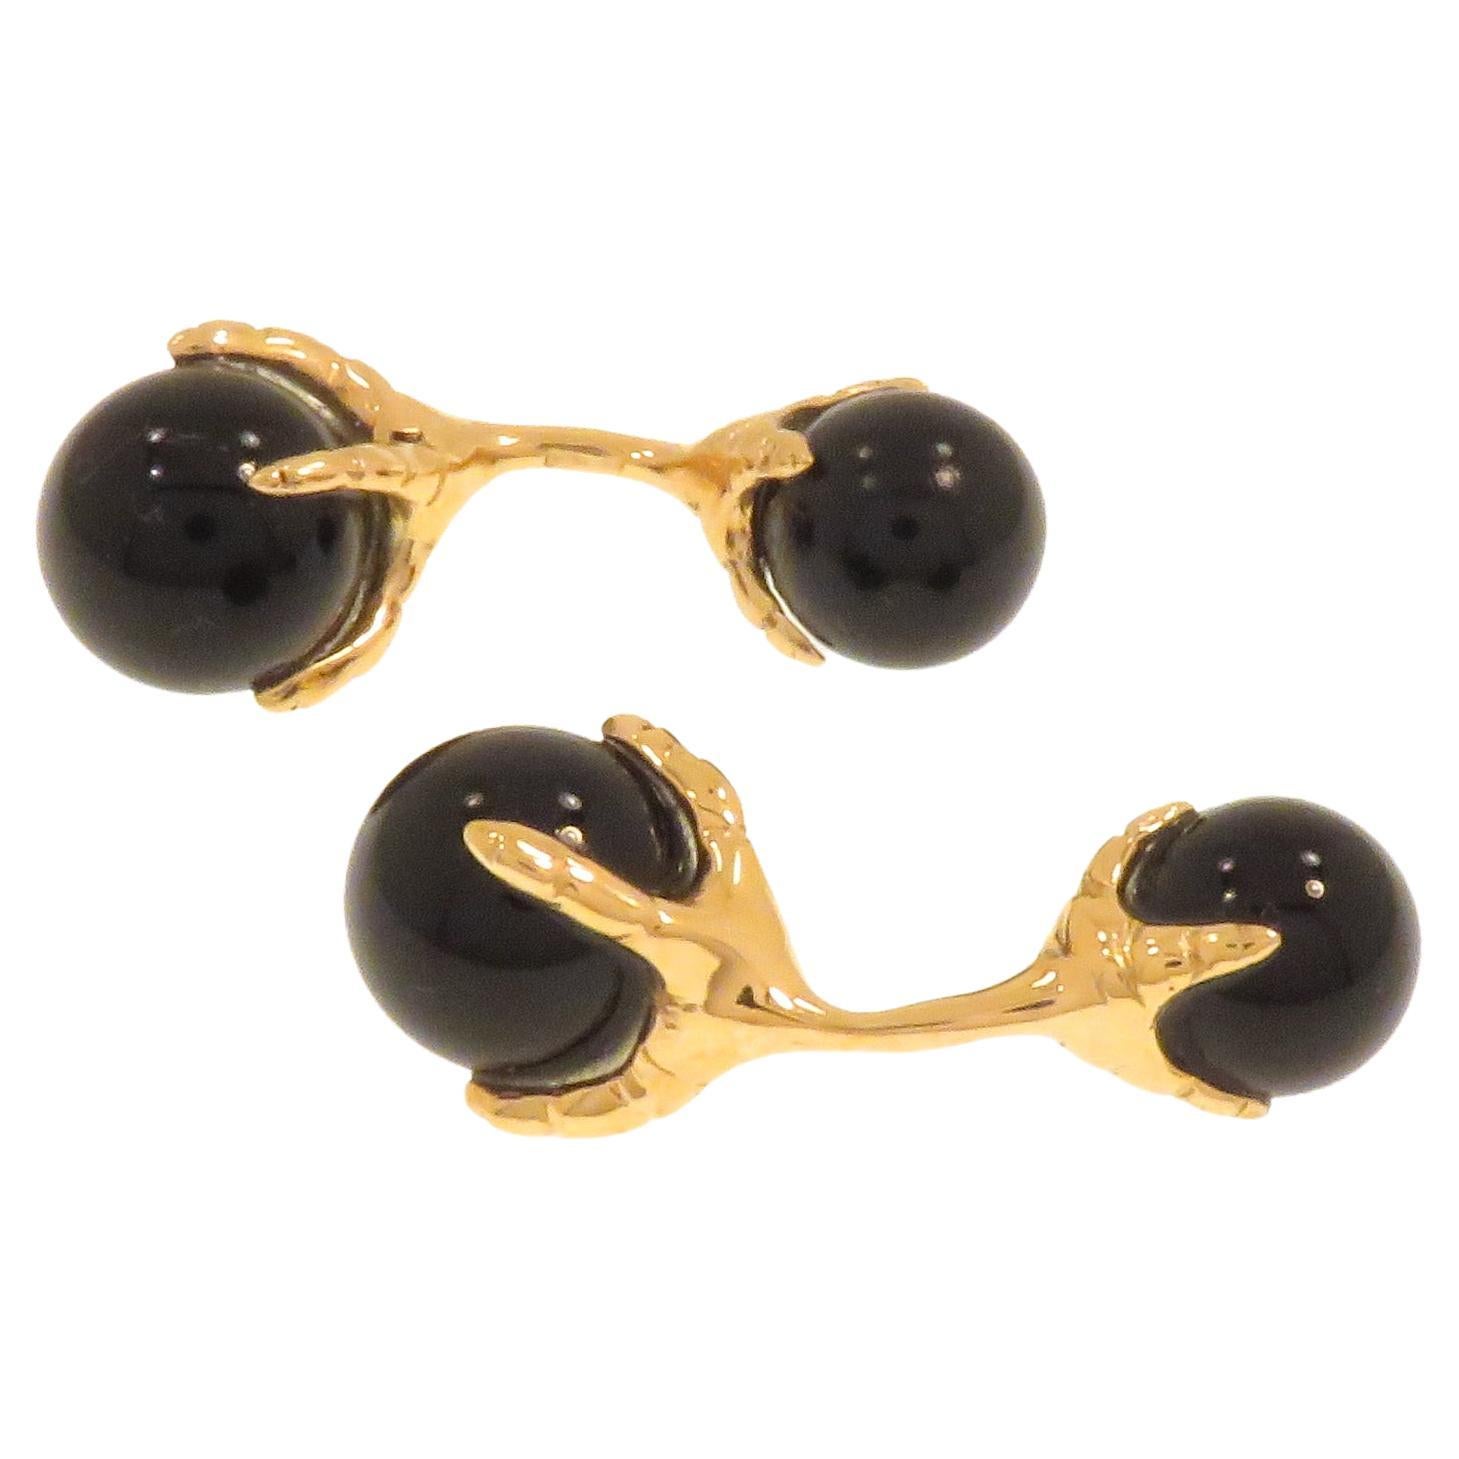 Onyx 9K Rose Gold Cufflinks Handcrafted in Italy